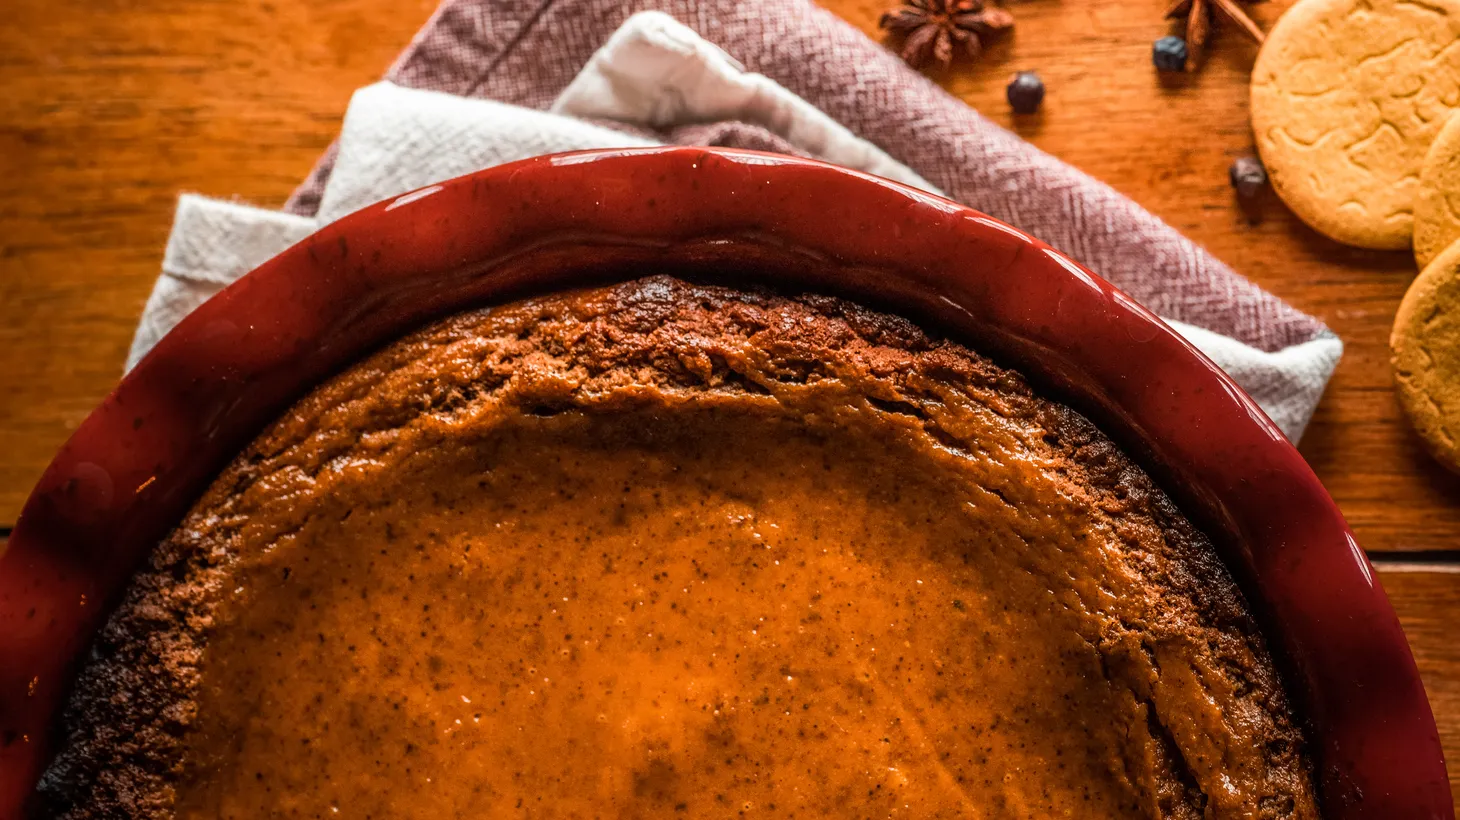 For Thanksgiving, try making pumpkin pie with a gingersnap cookie crust.